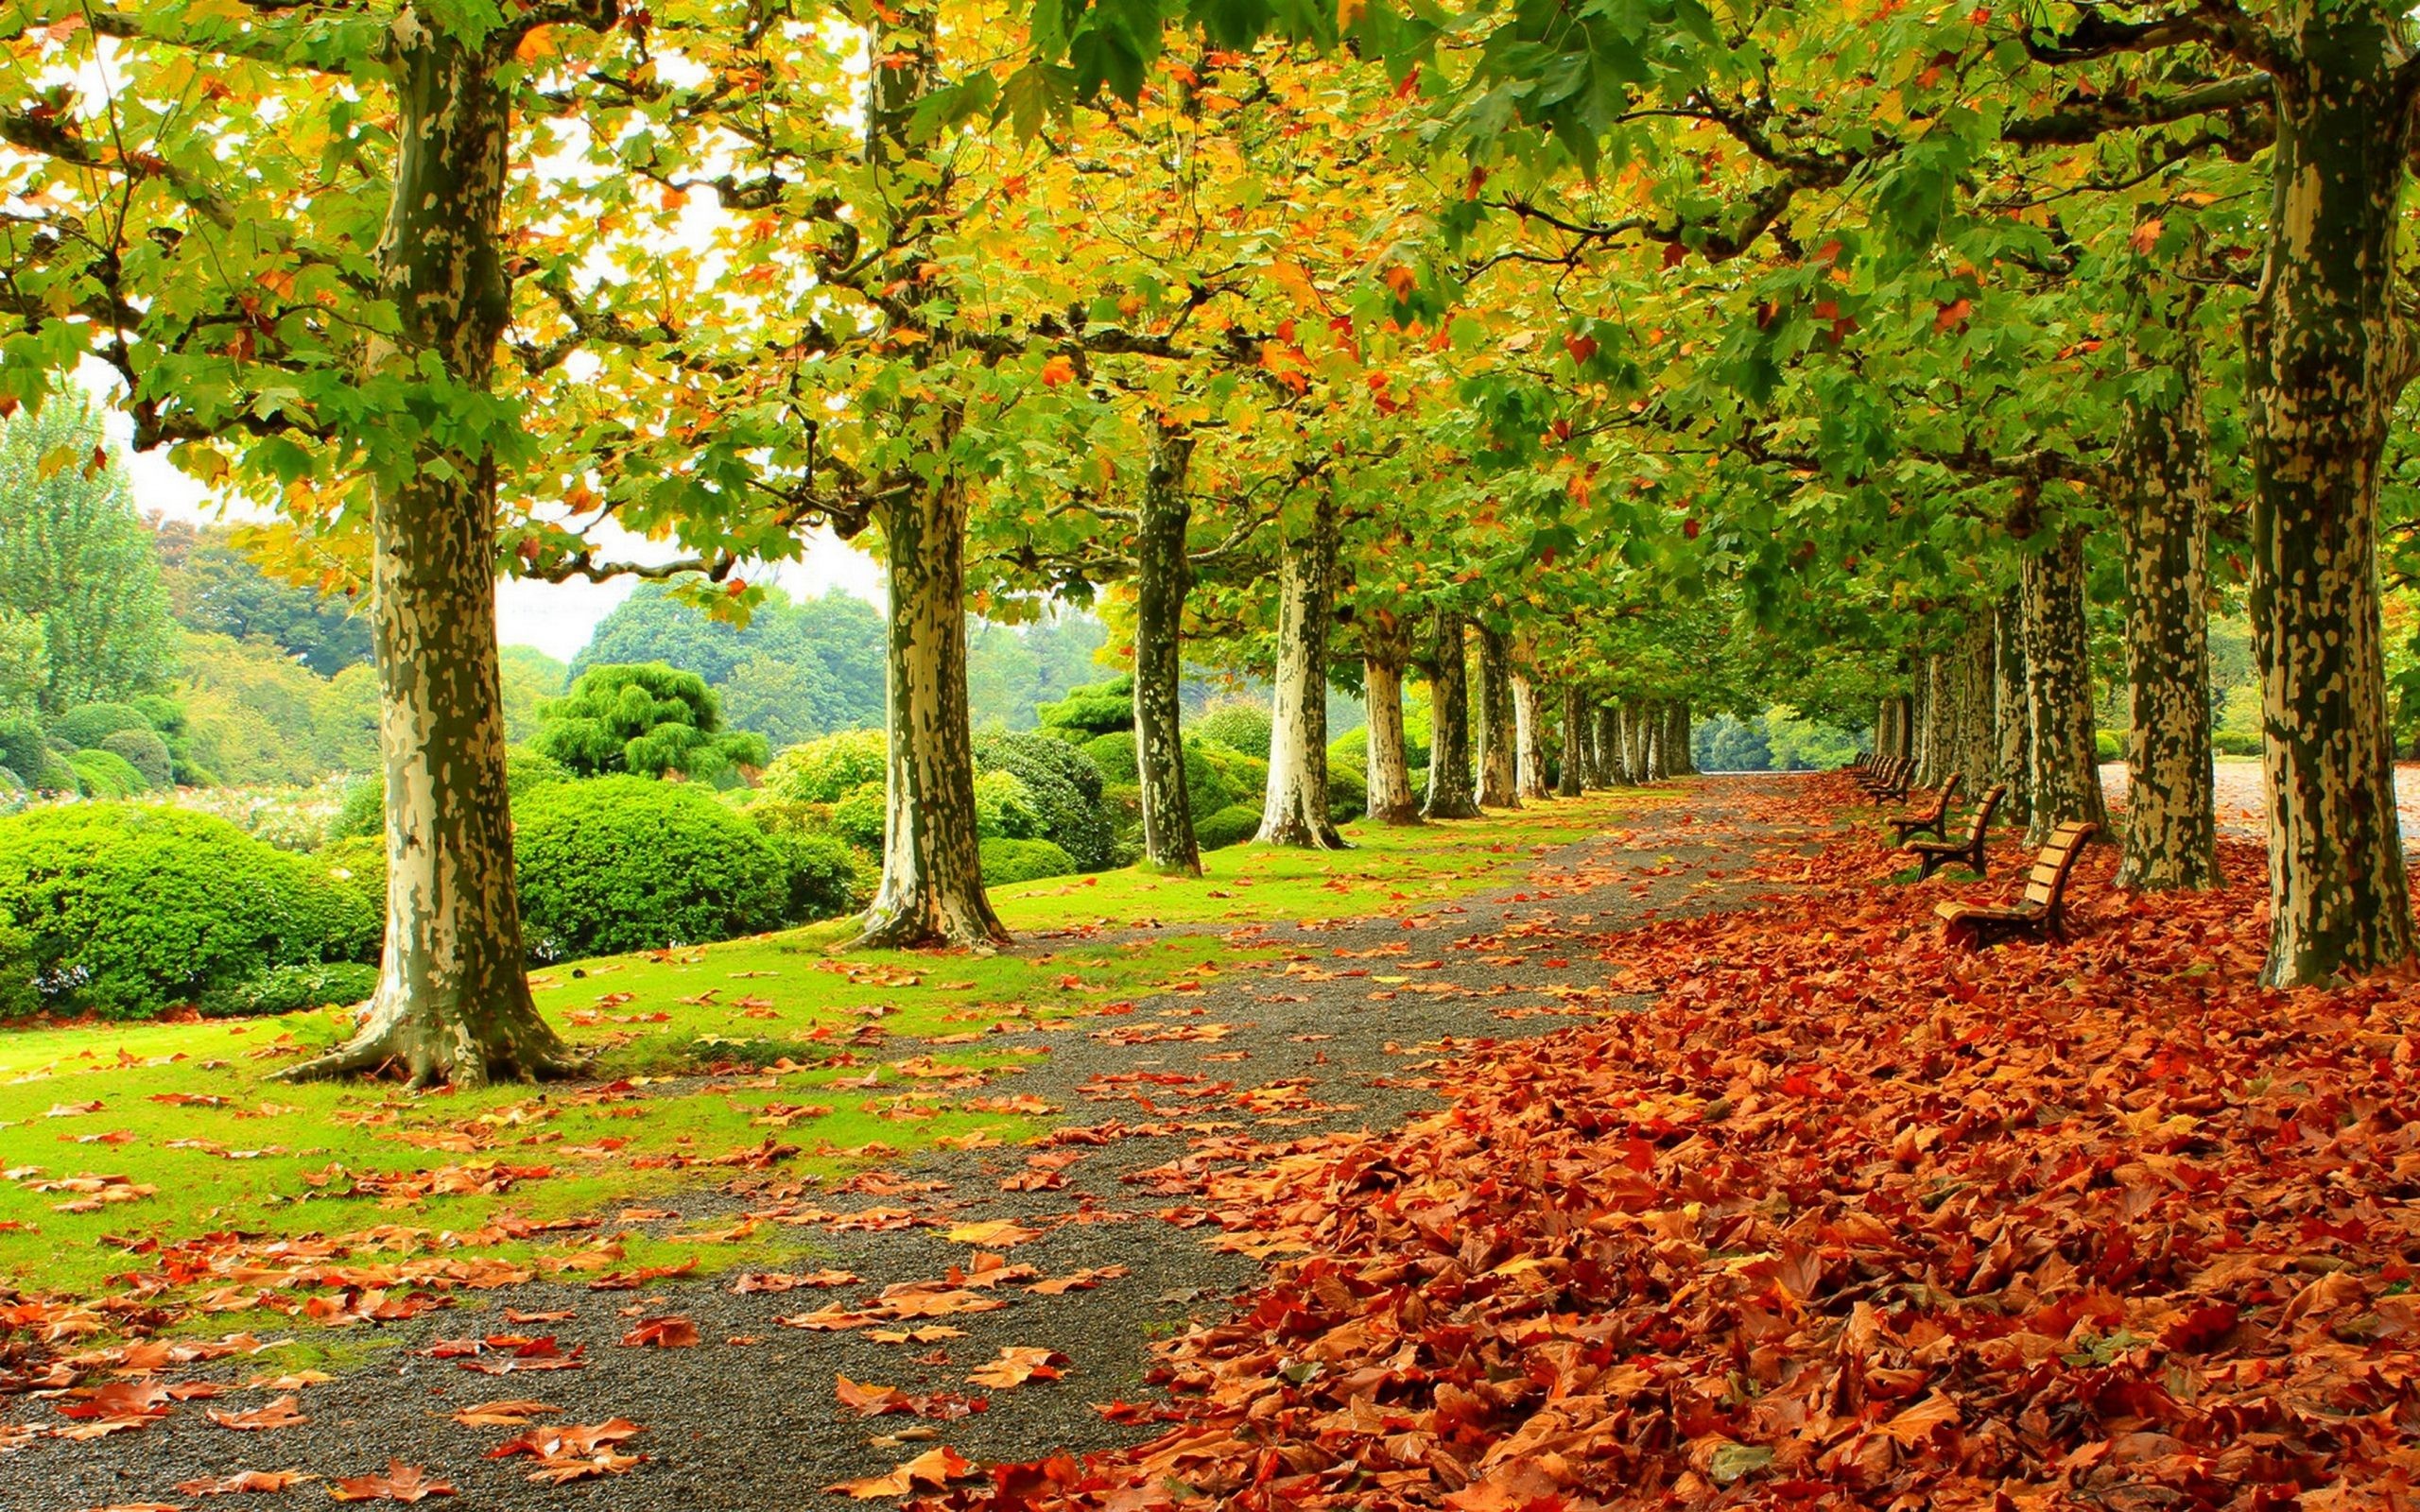 2560x1600 ... fall, Foliage, Gold, Leaves, Nature, Orange, Park, Red, ...